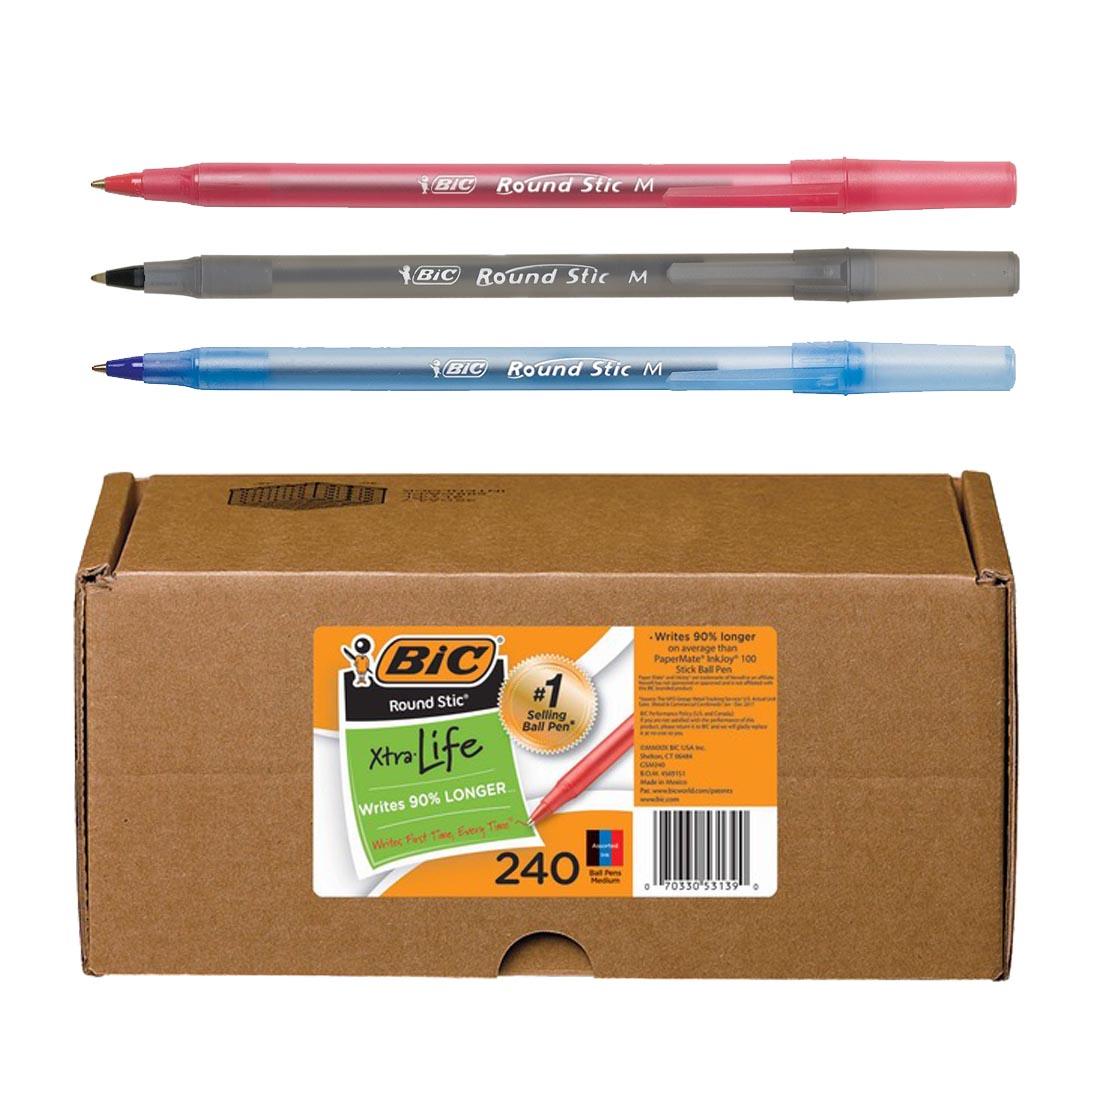 Box of 240 BiC Round Stic Xtra Life Assorted Ball-Point Pens with closeups of red, black and blue pens